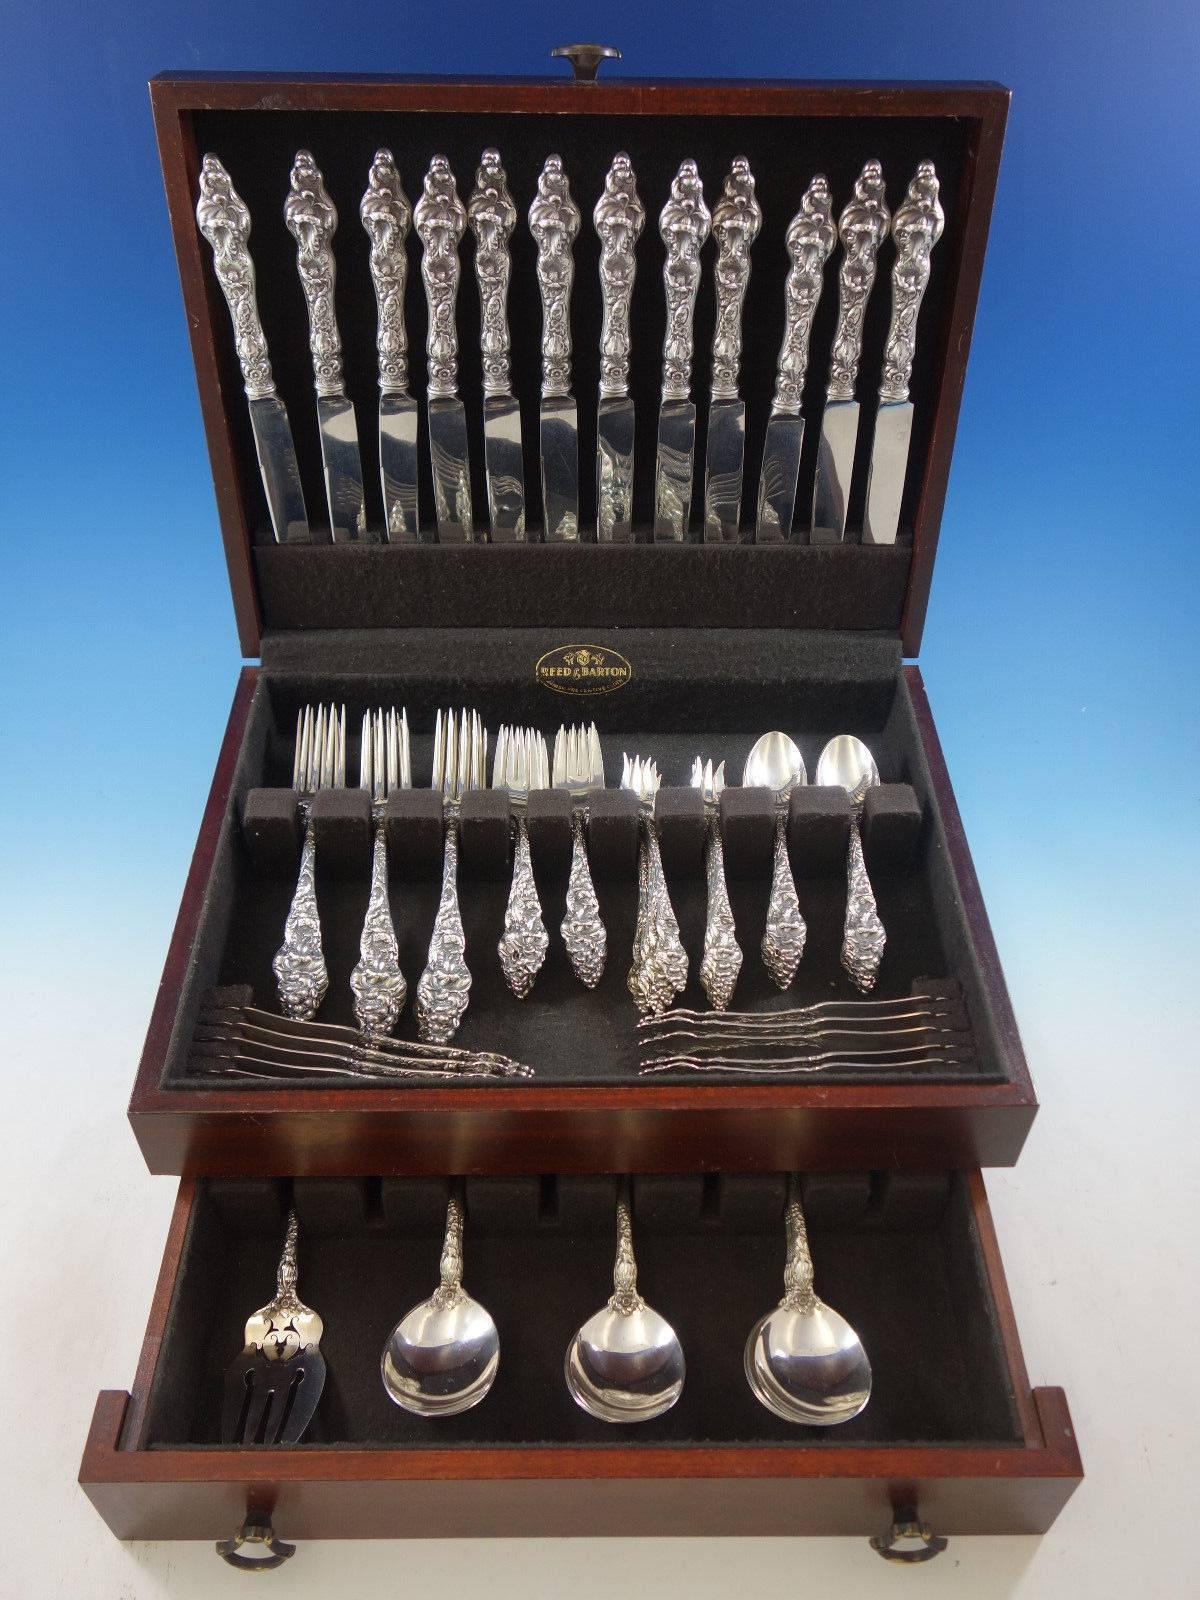 Les Six Fleurs Reed & Barton sterling silver dinner size flatware set of 85 pieces. This set includes:

12 dinner size knives, 9 3/4